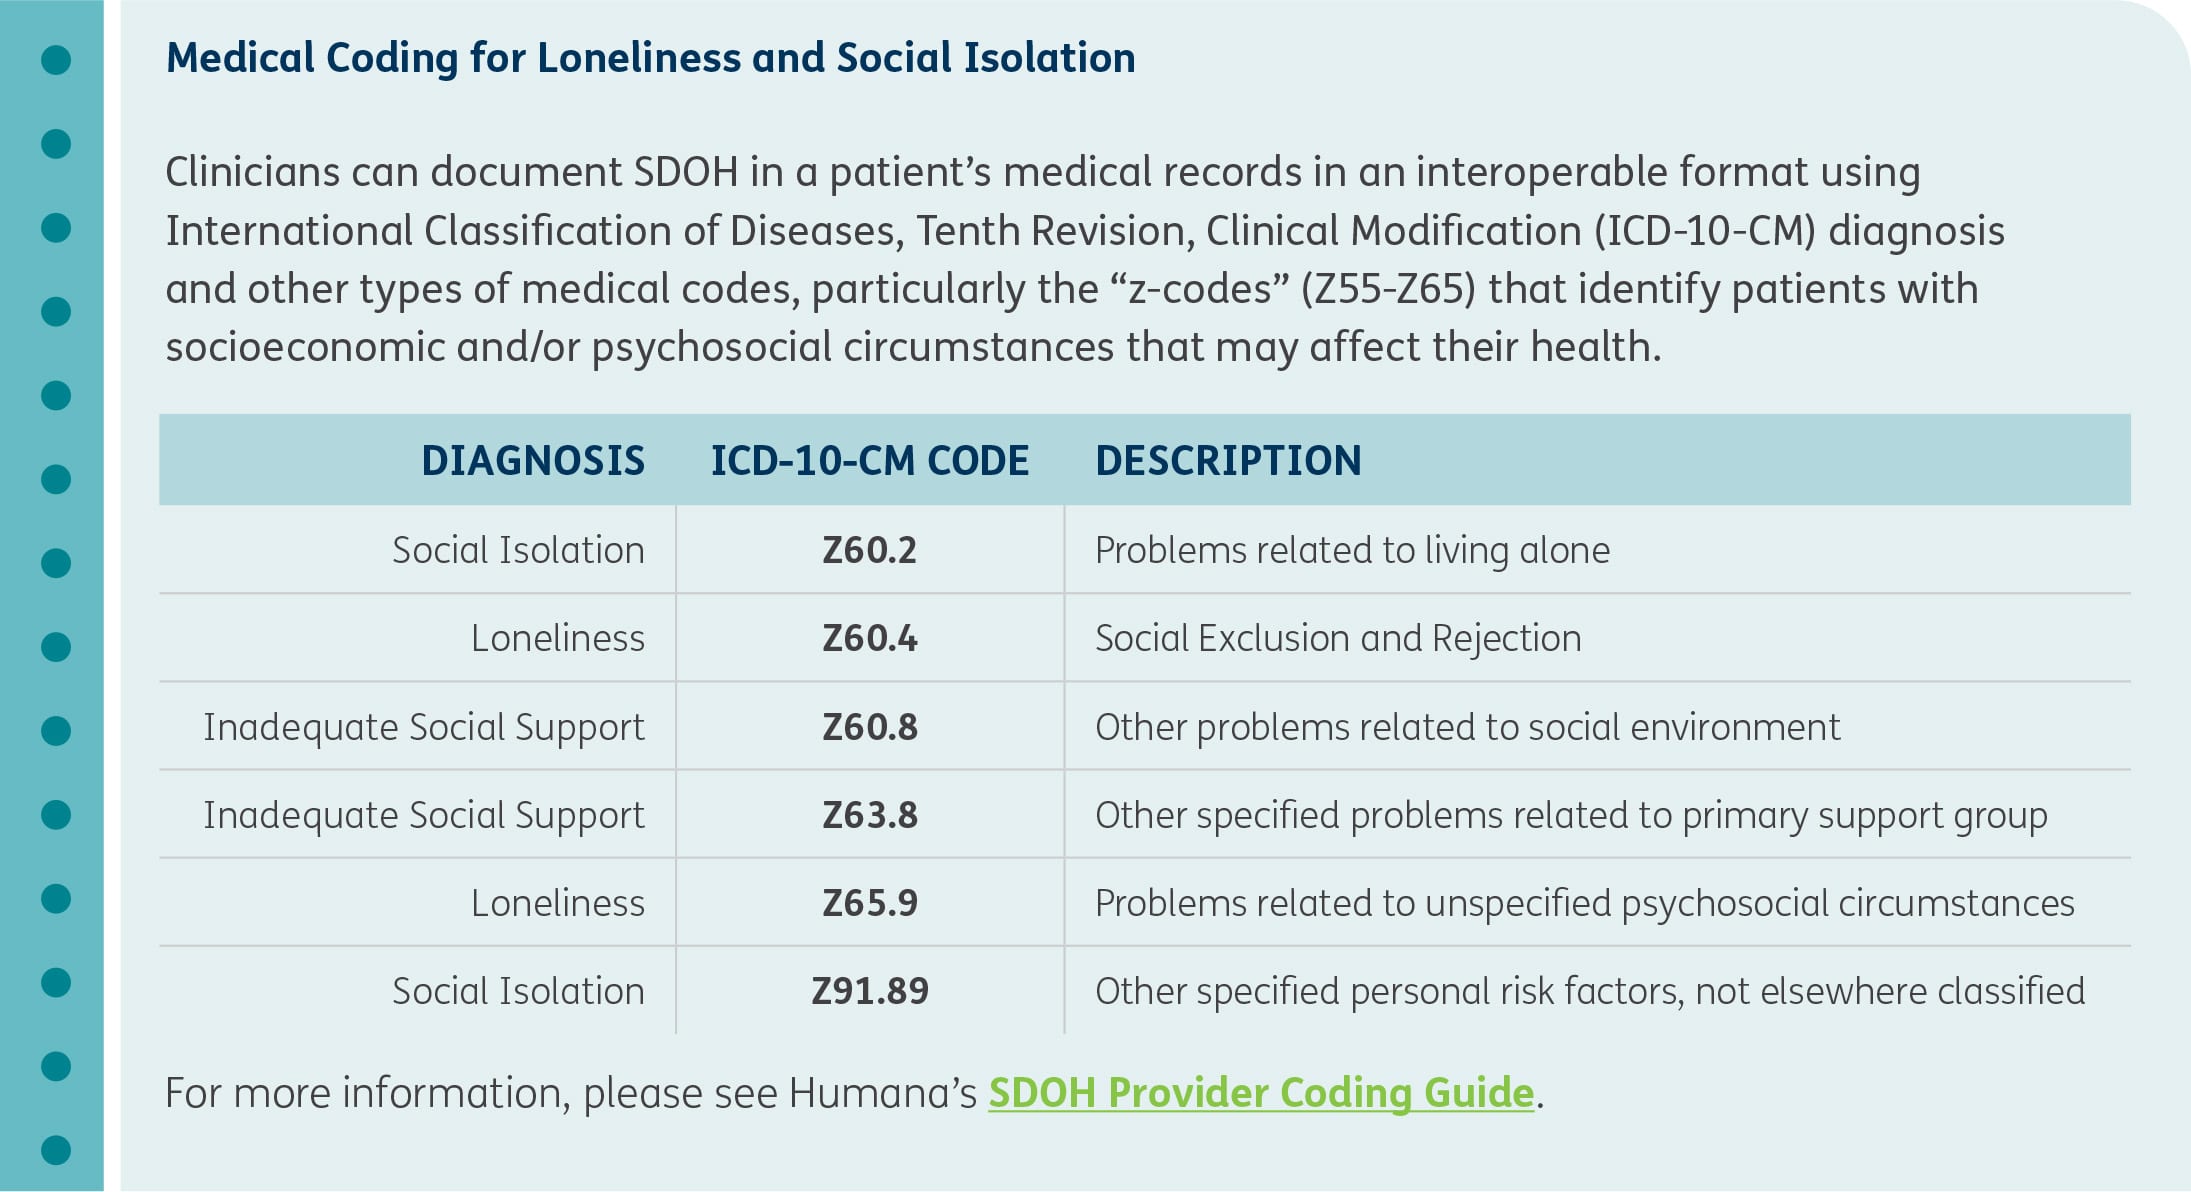 SDOH medical coding for loneliness and isolation